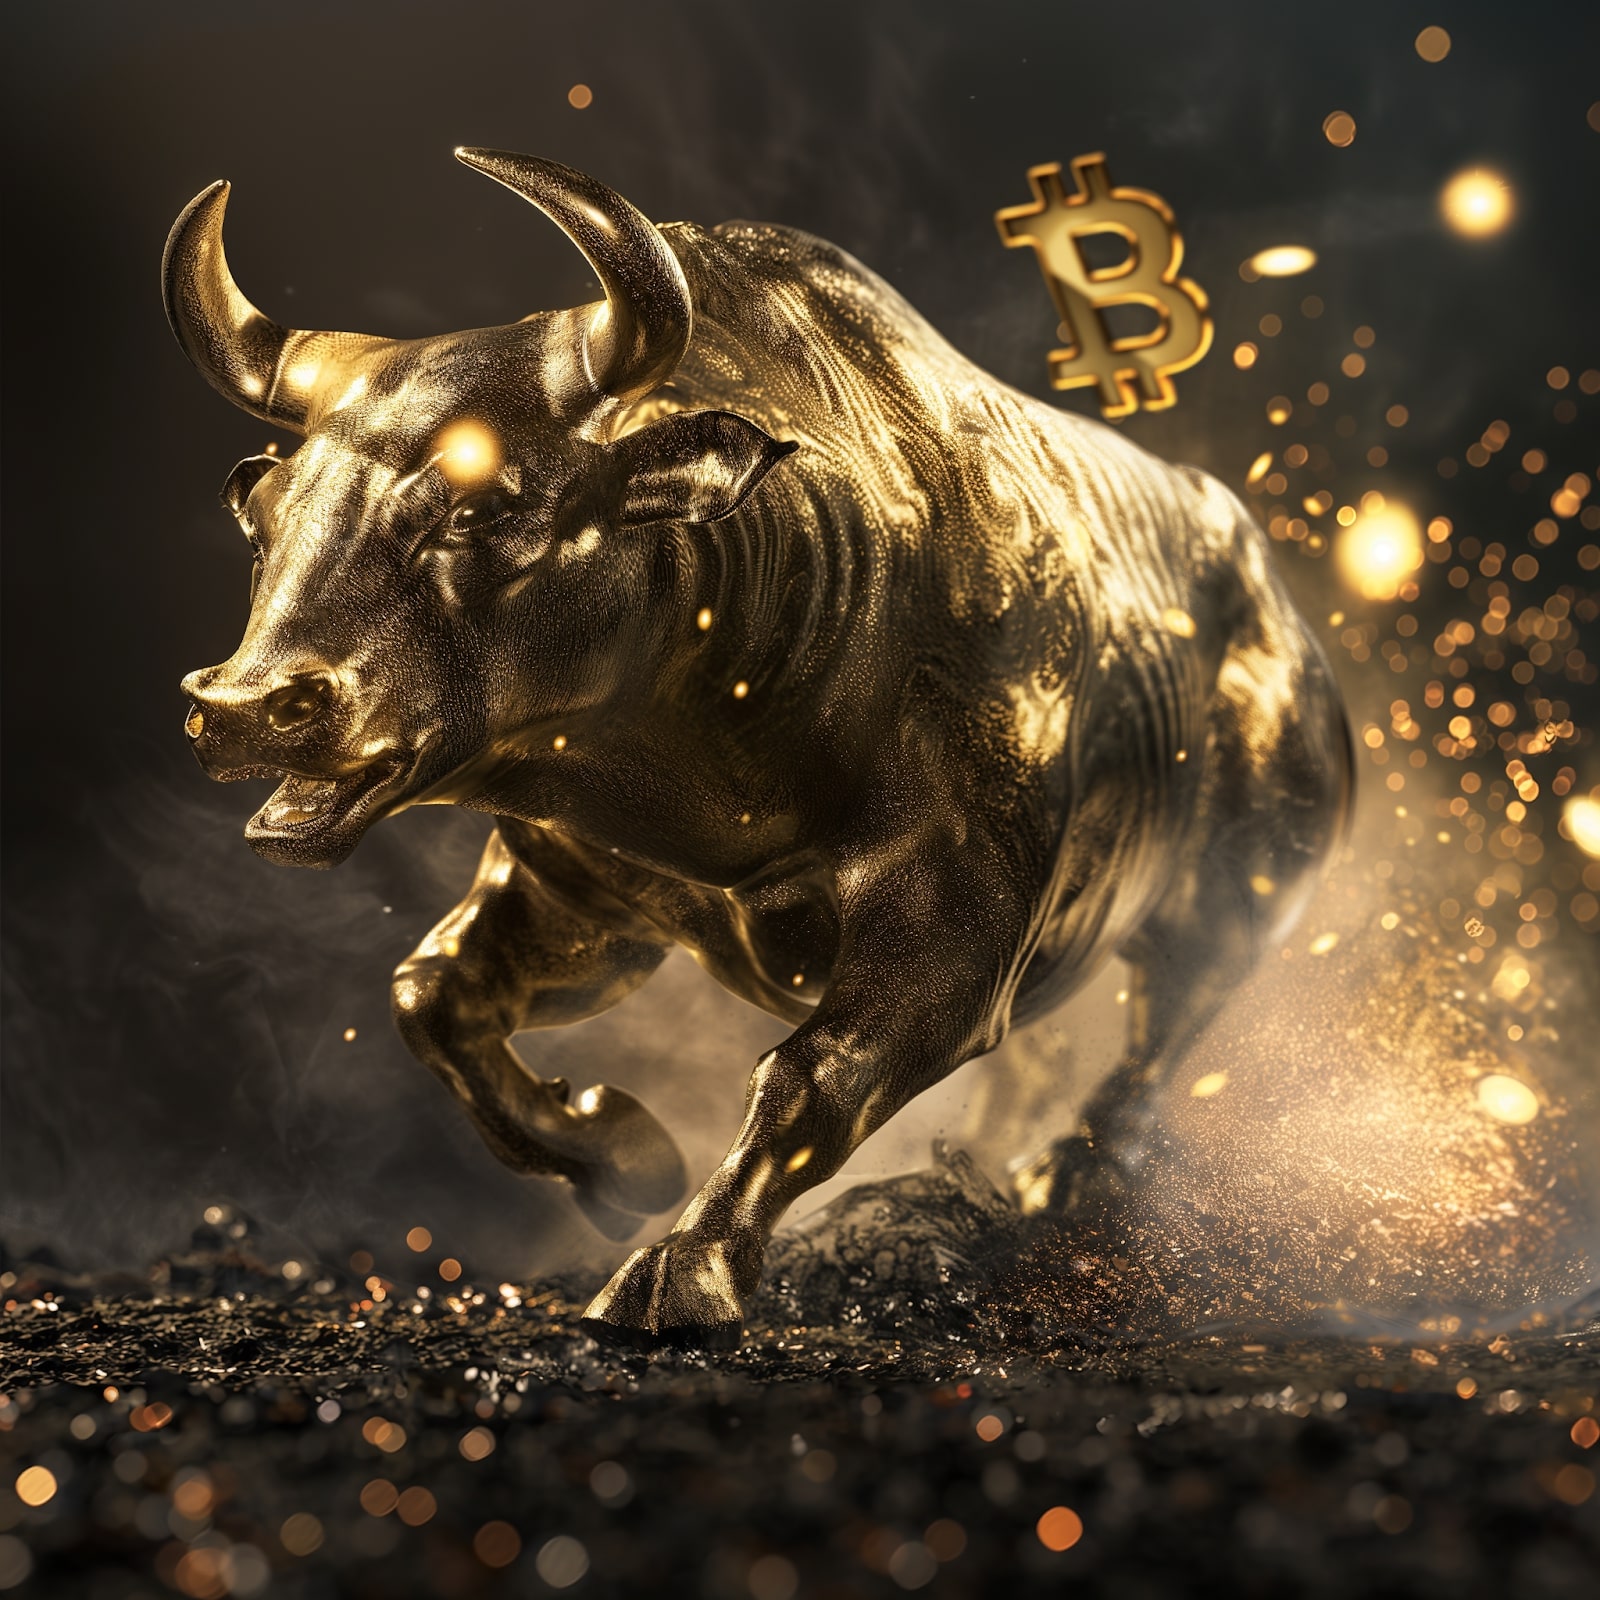 Are The Bitcoin Bulls About To Take Off? – An Analysis!